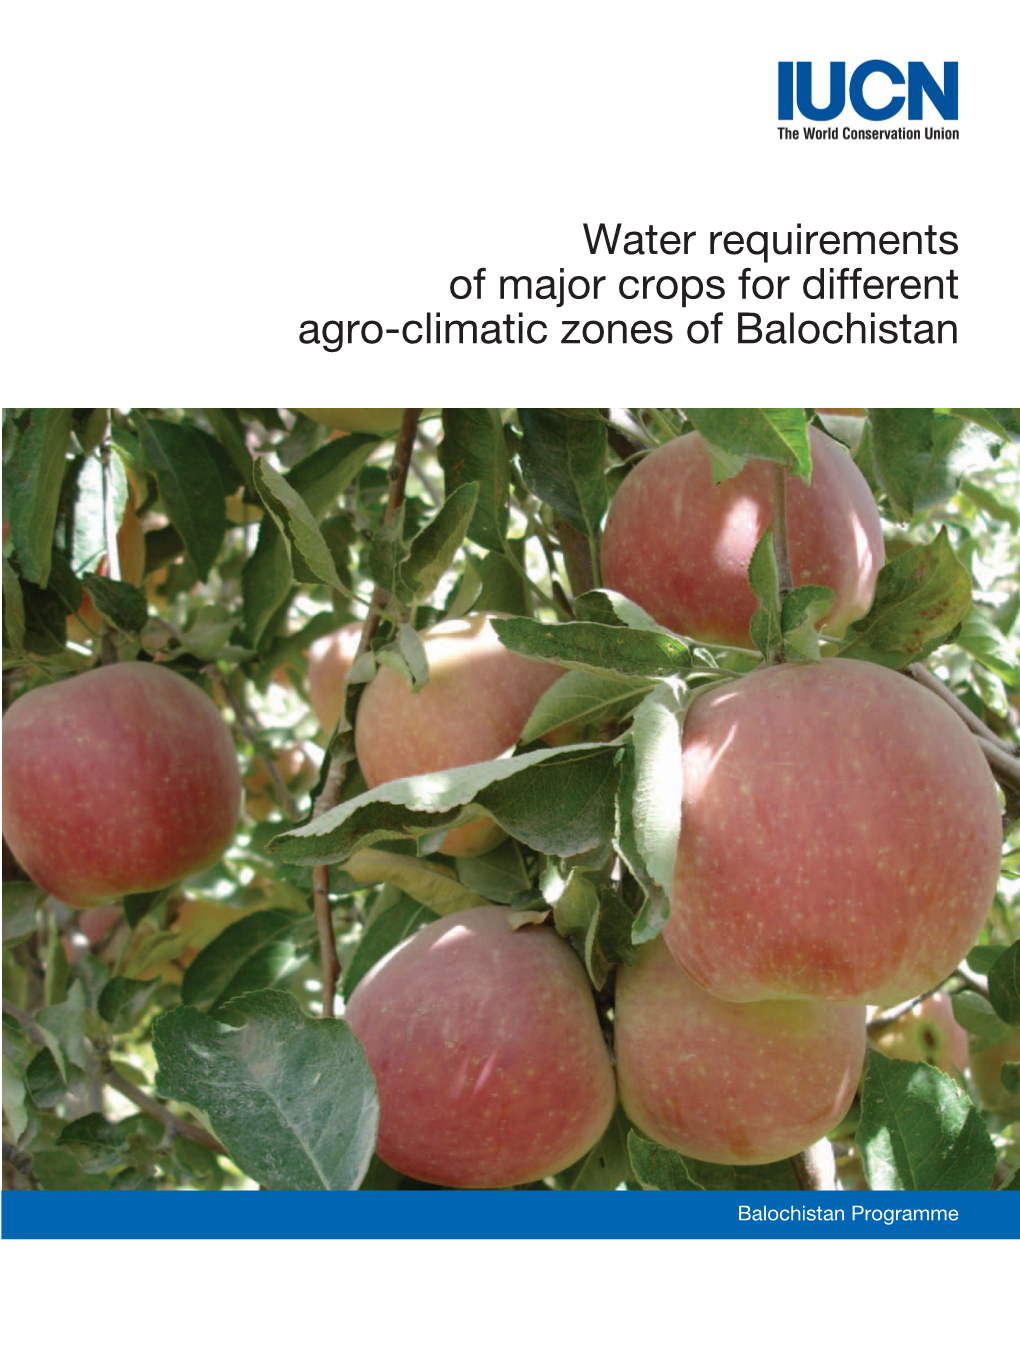 Water Requirements of Major Crops for Different Agro-Climatic Zones of Balochistan